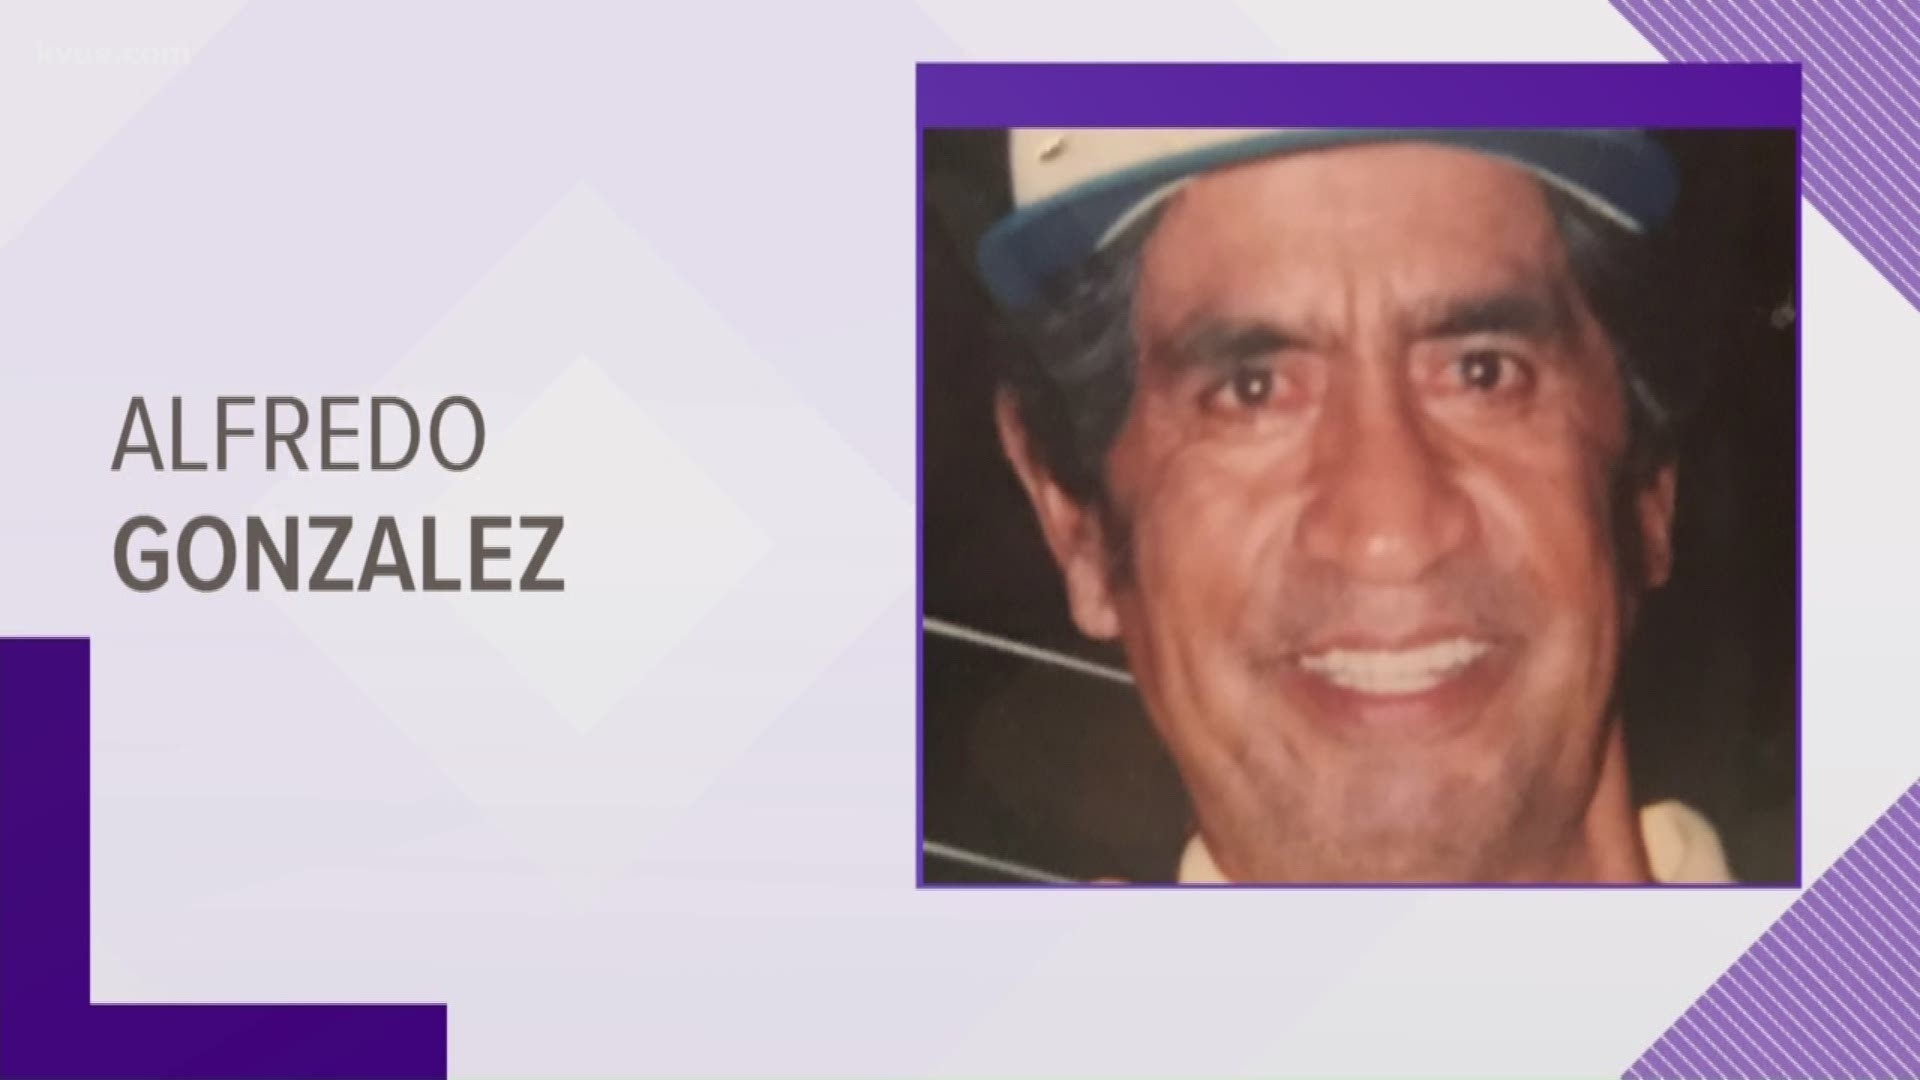 Austin PD is searching for Alfredo Gonzales, 80. He was last seen wearing a blue striped shirt and blue jeans walking with a red walker.